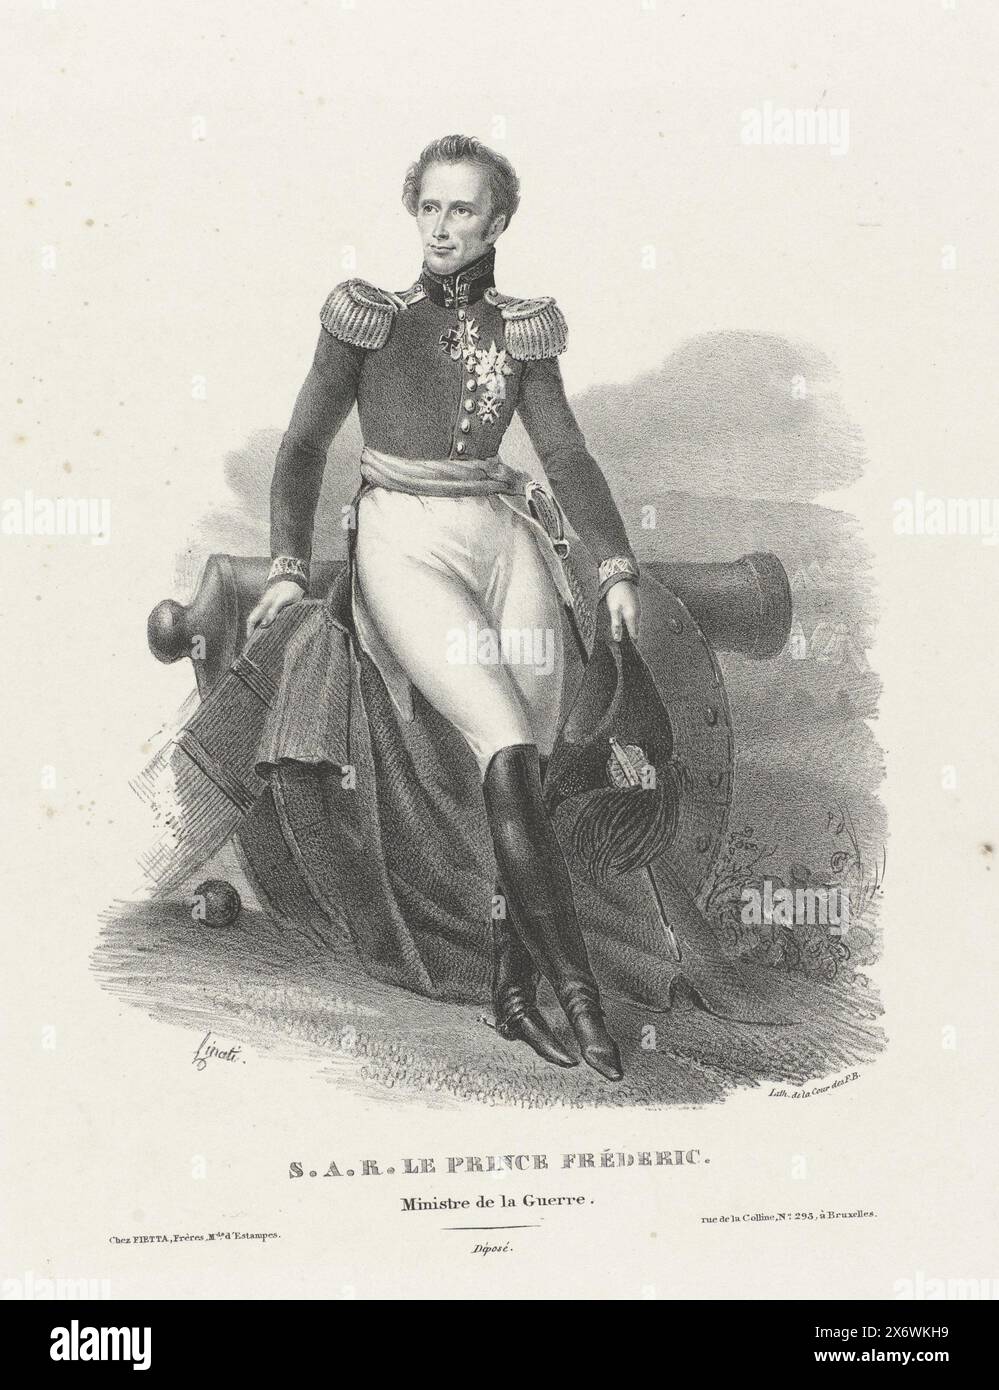 Portrait of Frederik, Prince of the Netherlands, Portrait of Frederik. He's leaning against a cannon. In the bottom margin are name and titles., print, print maker: Claudio Linati, (mentioned on object), publisher: Frères Fietta, (mentioned on object), Brussels, (possibly), 1815 - c. 1829, paper, height, 334 mm × width, 253 mm Stock Photo